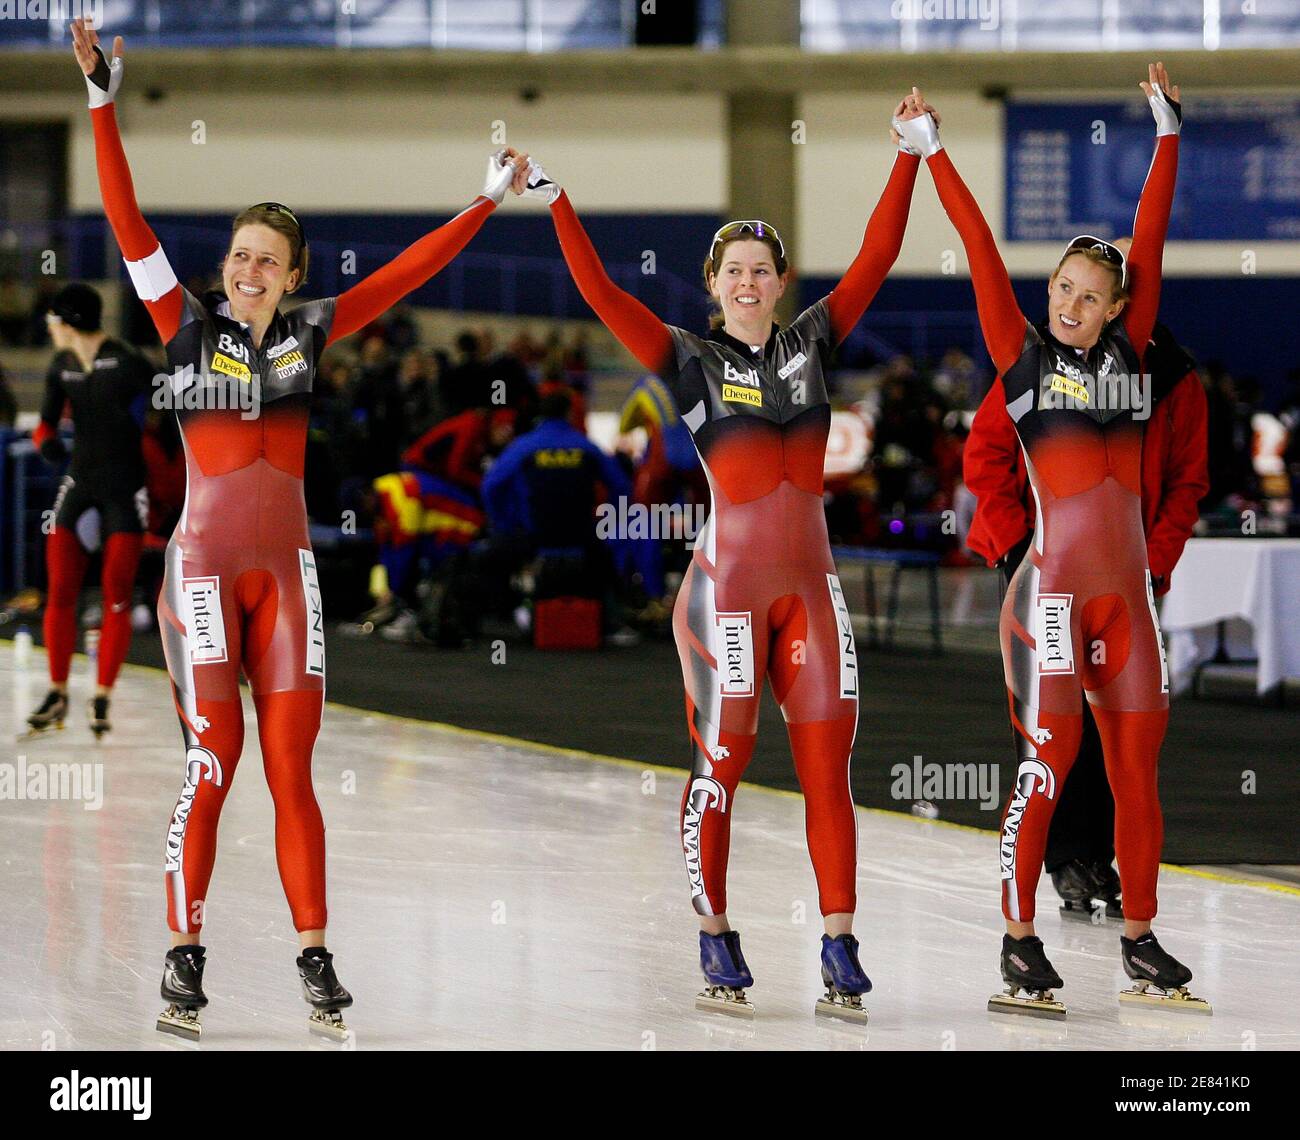 Kristina Groves (L), Christine Nesbitt (C) and Brittany Schussler of Canada celebrate their new world record in the ladies team pursuit event during the ISU World Cup speed skating race in Calgary, Alberta, December 6, 2009. REUTERS/Todd Korol  (CANADA SPORT SPEED SKATING) Stock Photo